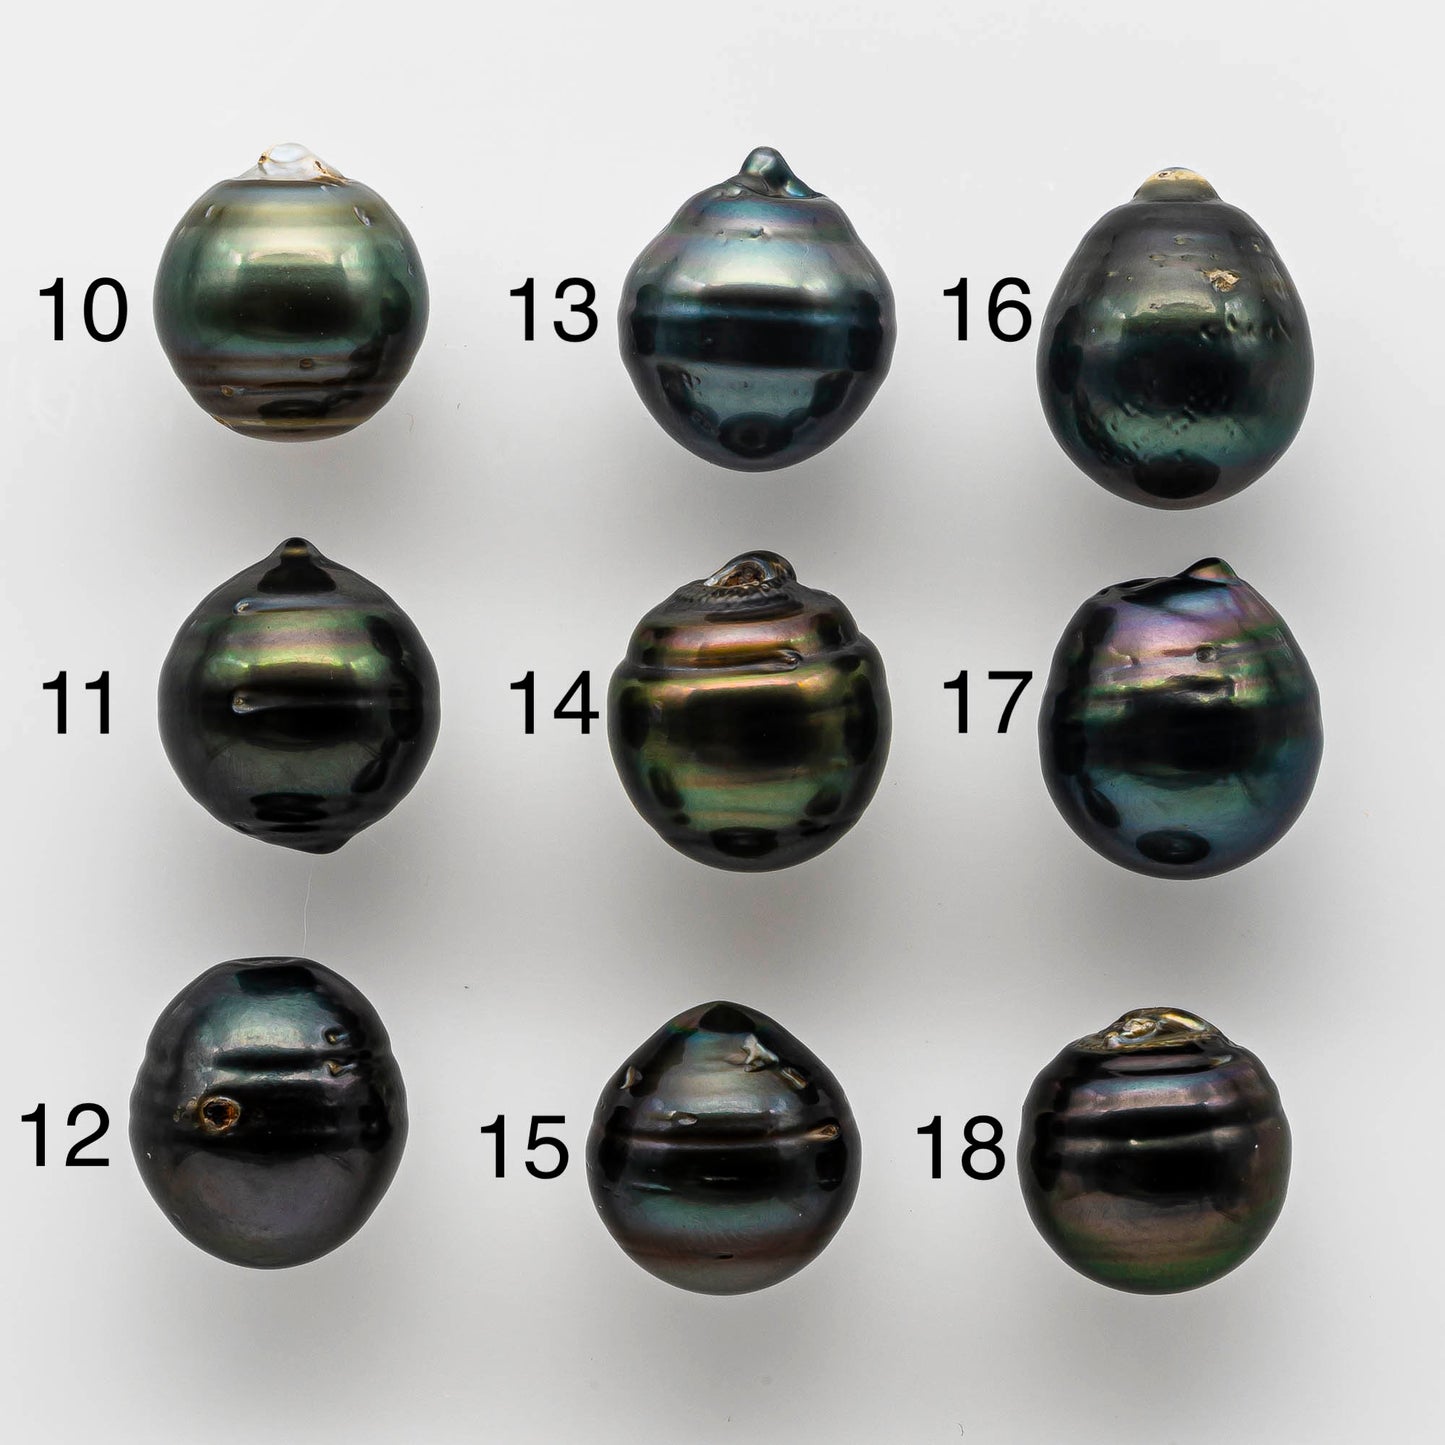 13-14mm Black Tahitian Pearl Bead Drop Loose Undrilled with High Luster and Natural Color, Half or Full Drilled to Large Hole, SKU # 1661TH